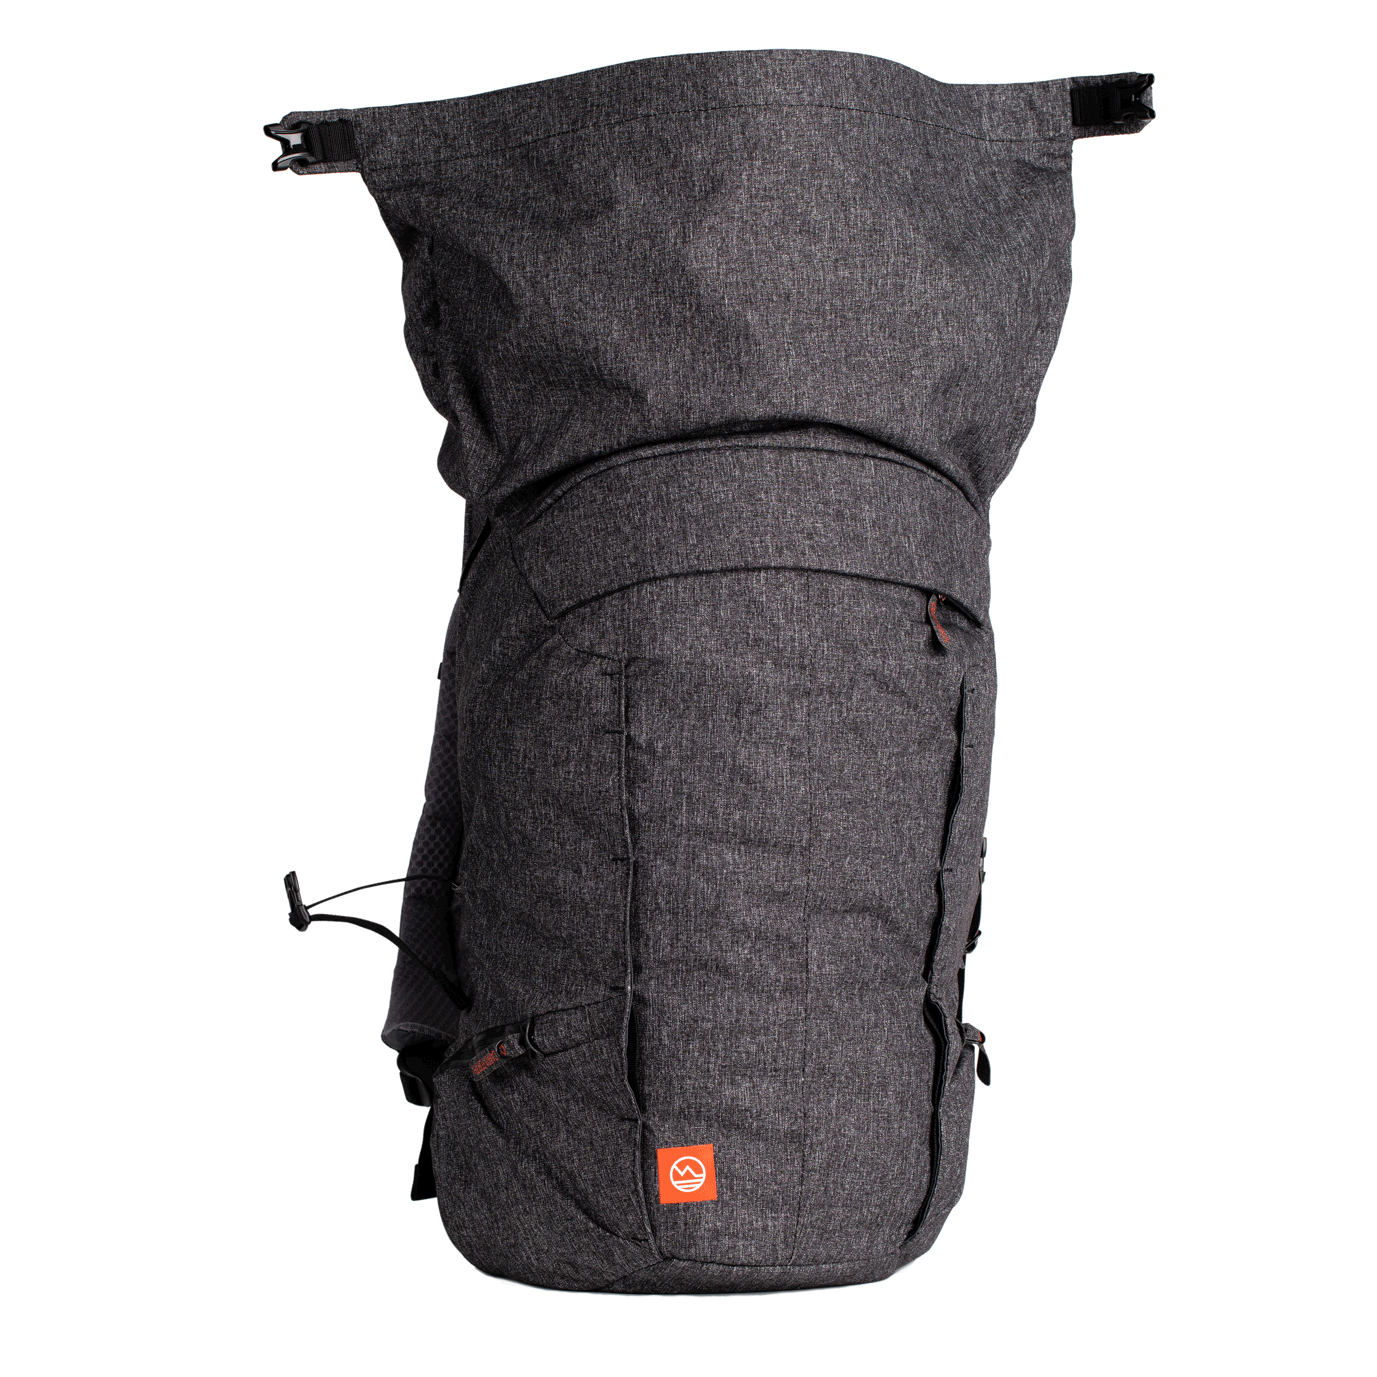 Gif showing off opening, water bottle pocket, hip straps  of Midnight Black Tahquitz Pack